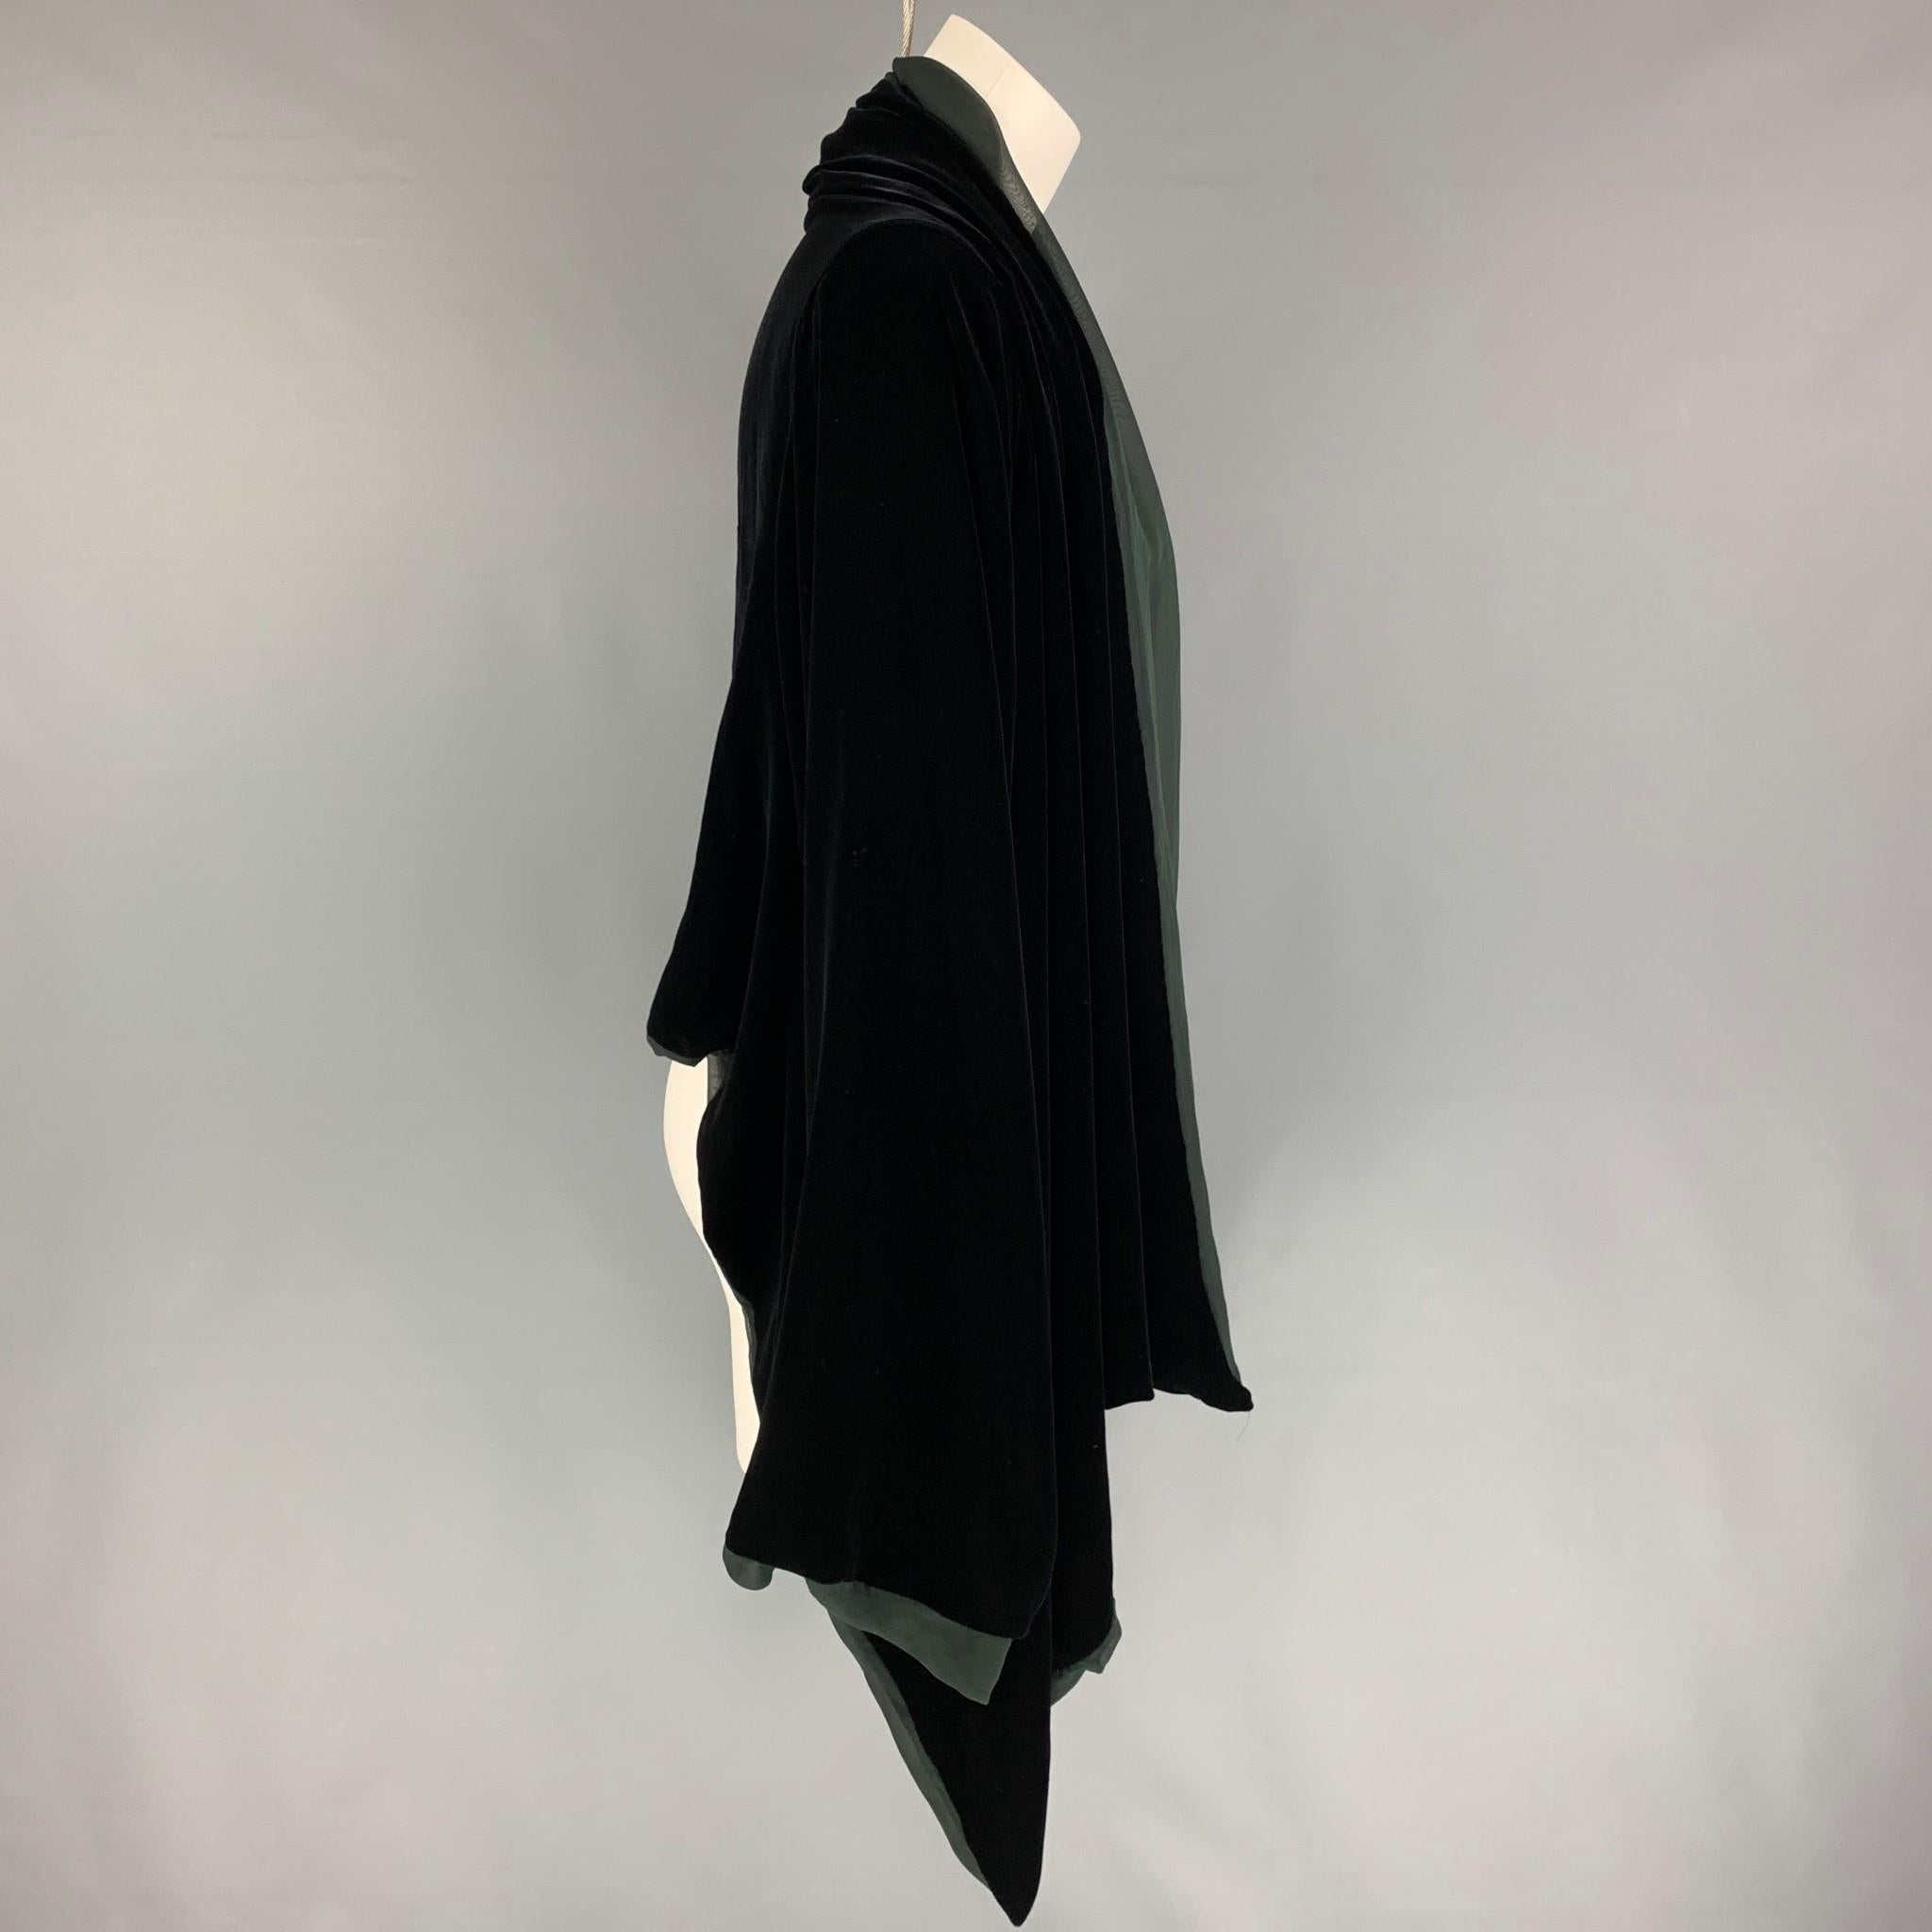 JEAN PAUL GAULTIER jacket comes in a black velvet rayon / silk with a chiffon liner featuring long sleeves, draped, and a open front. Made in Italy.

Very Good Pre-Owned Condition.
Marked: I 42 / D 38 / F 38 / GB 10 / USA 8

Measurements:

Shoulder: